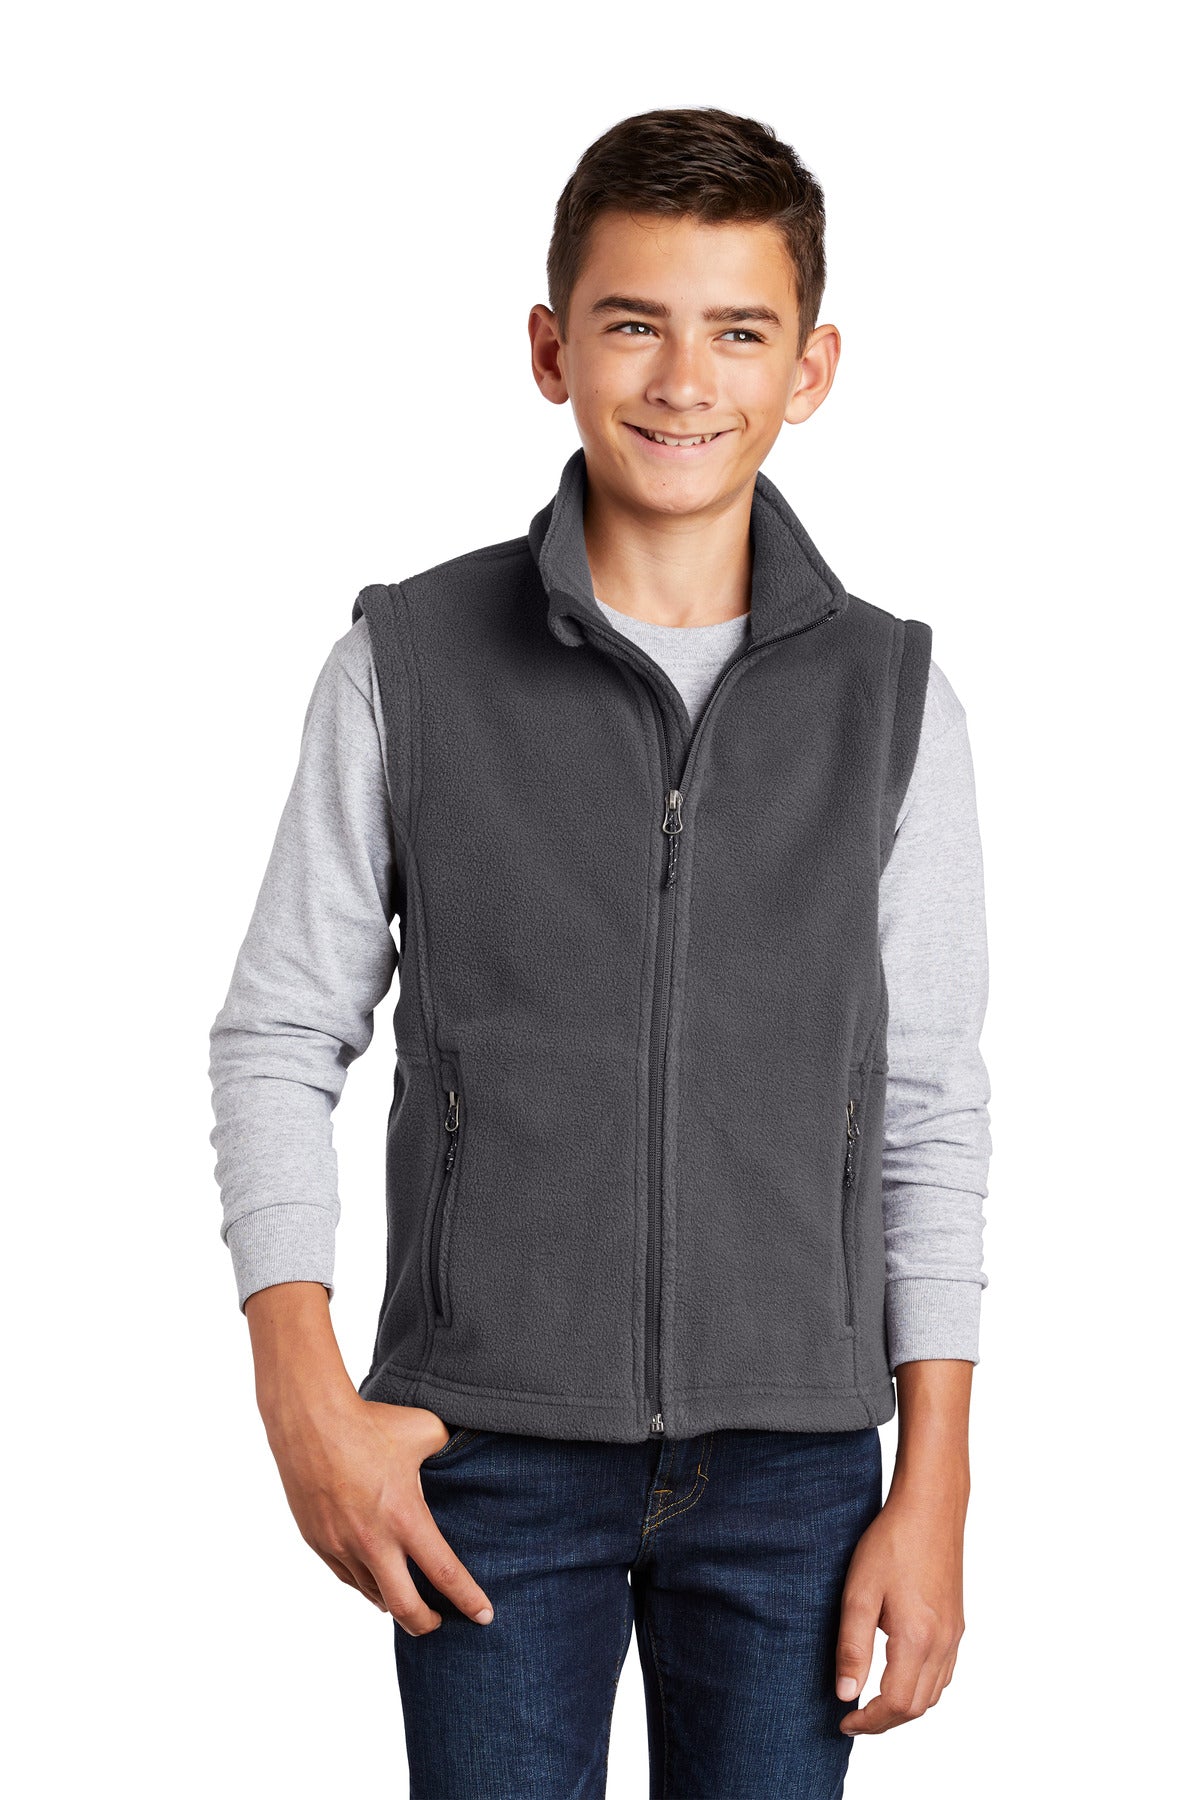 Custom Embroidered - Port Authority® Youth Value Fleece Vest. Y219